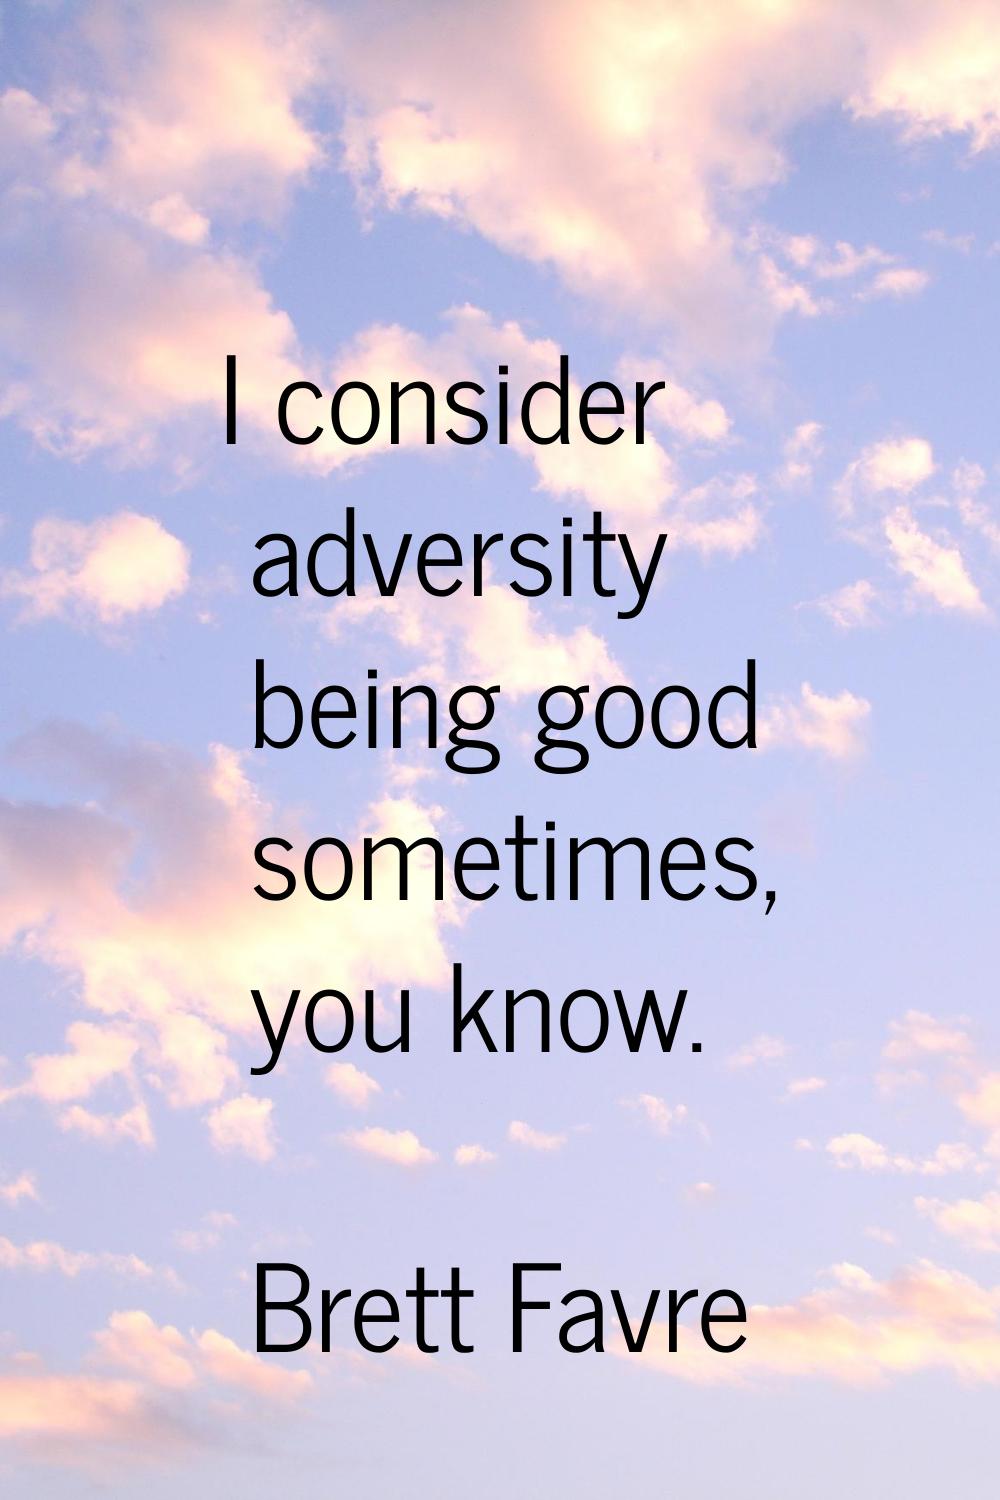 I consider adversity being good sometimes, you know.